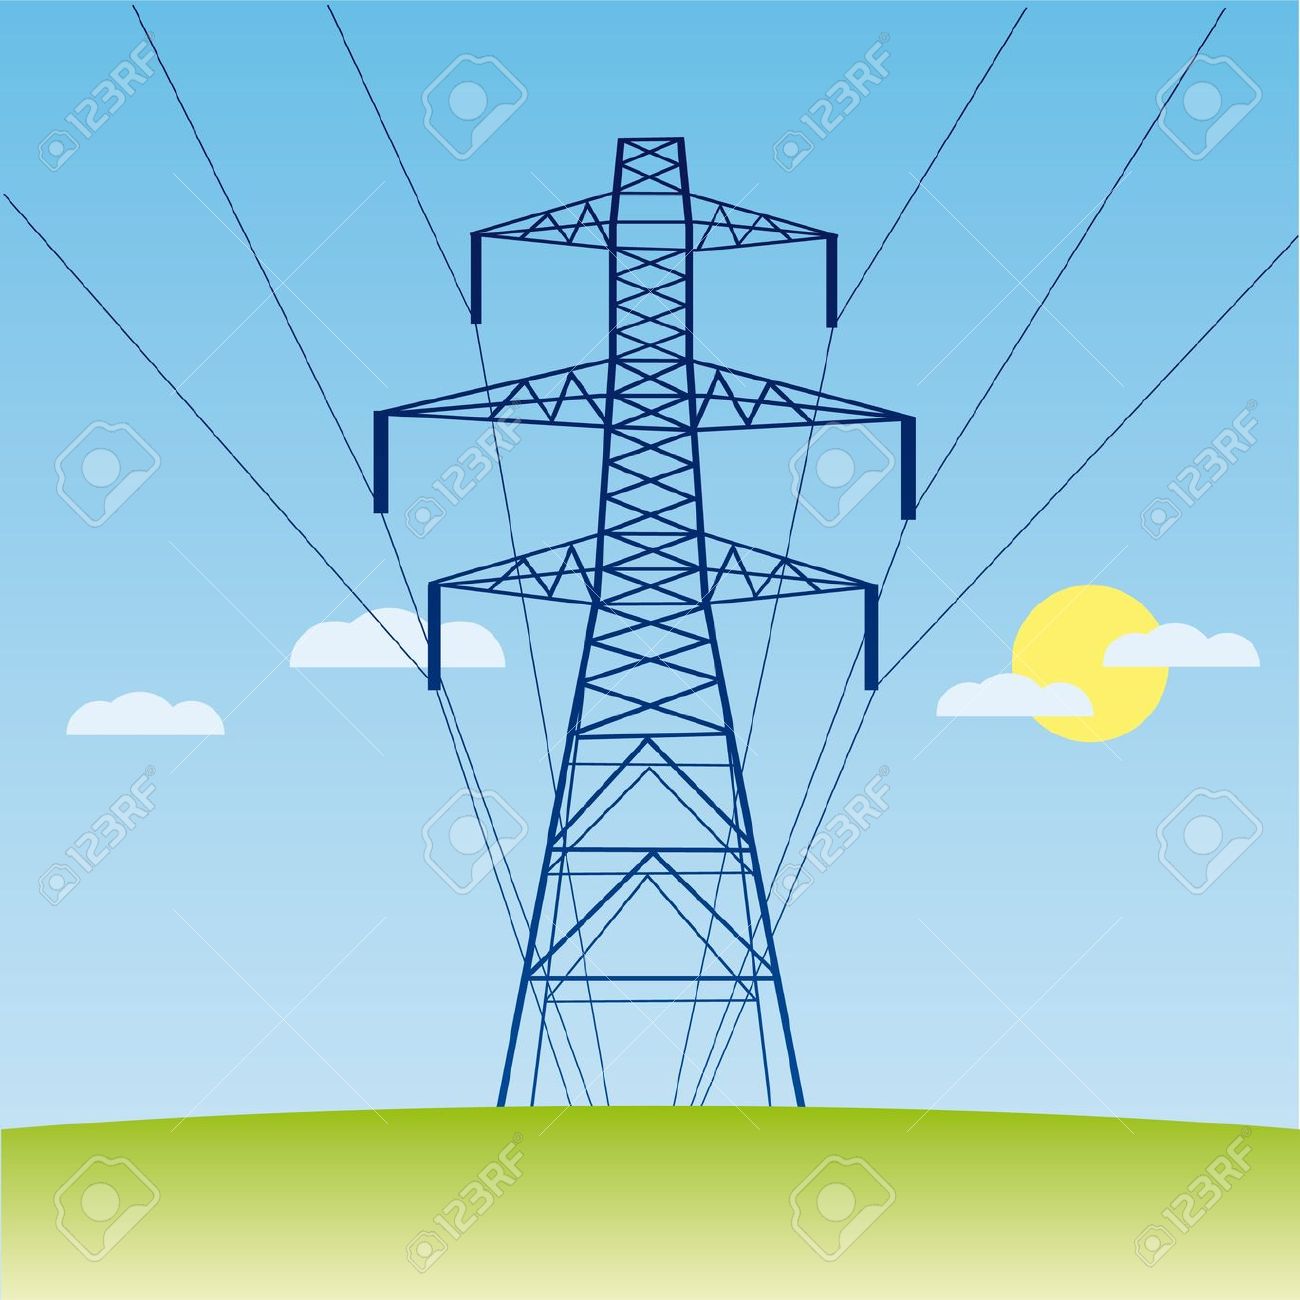 clipart of power lines - photo #41